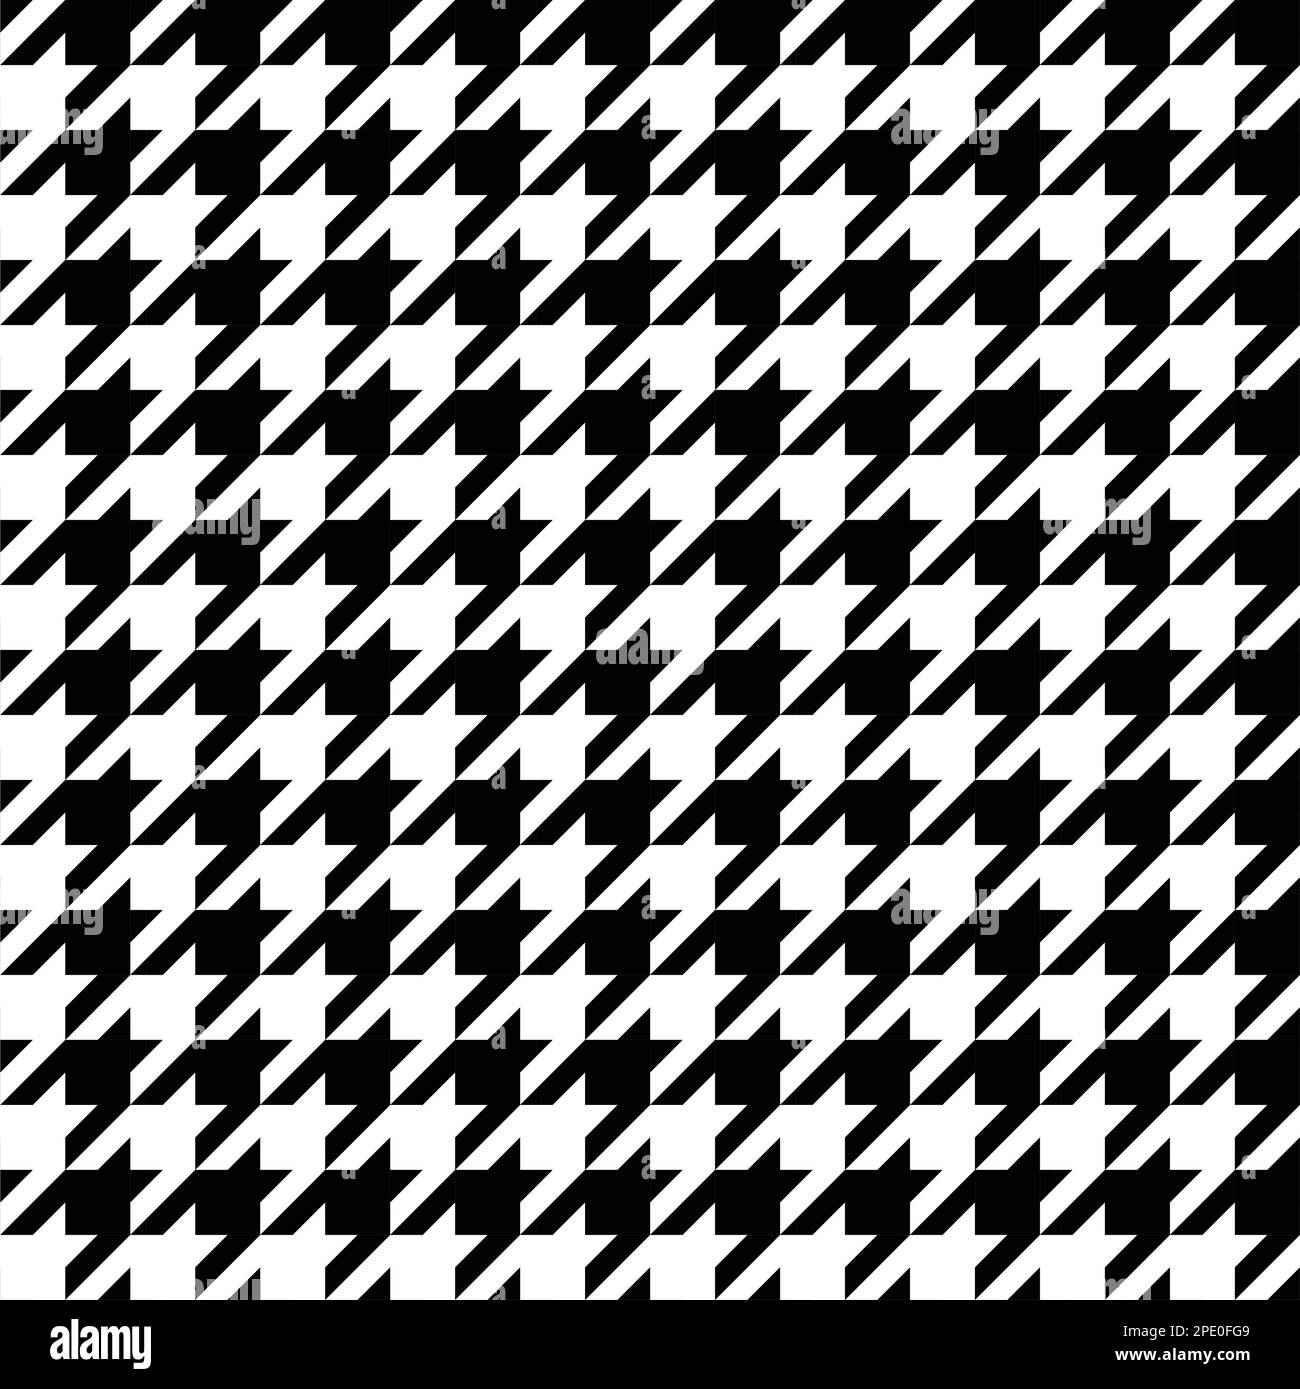 Tessellation pattern clothing Black and White Stock Photos & Images - Alamy